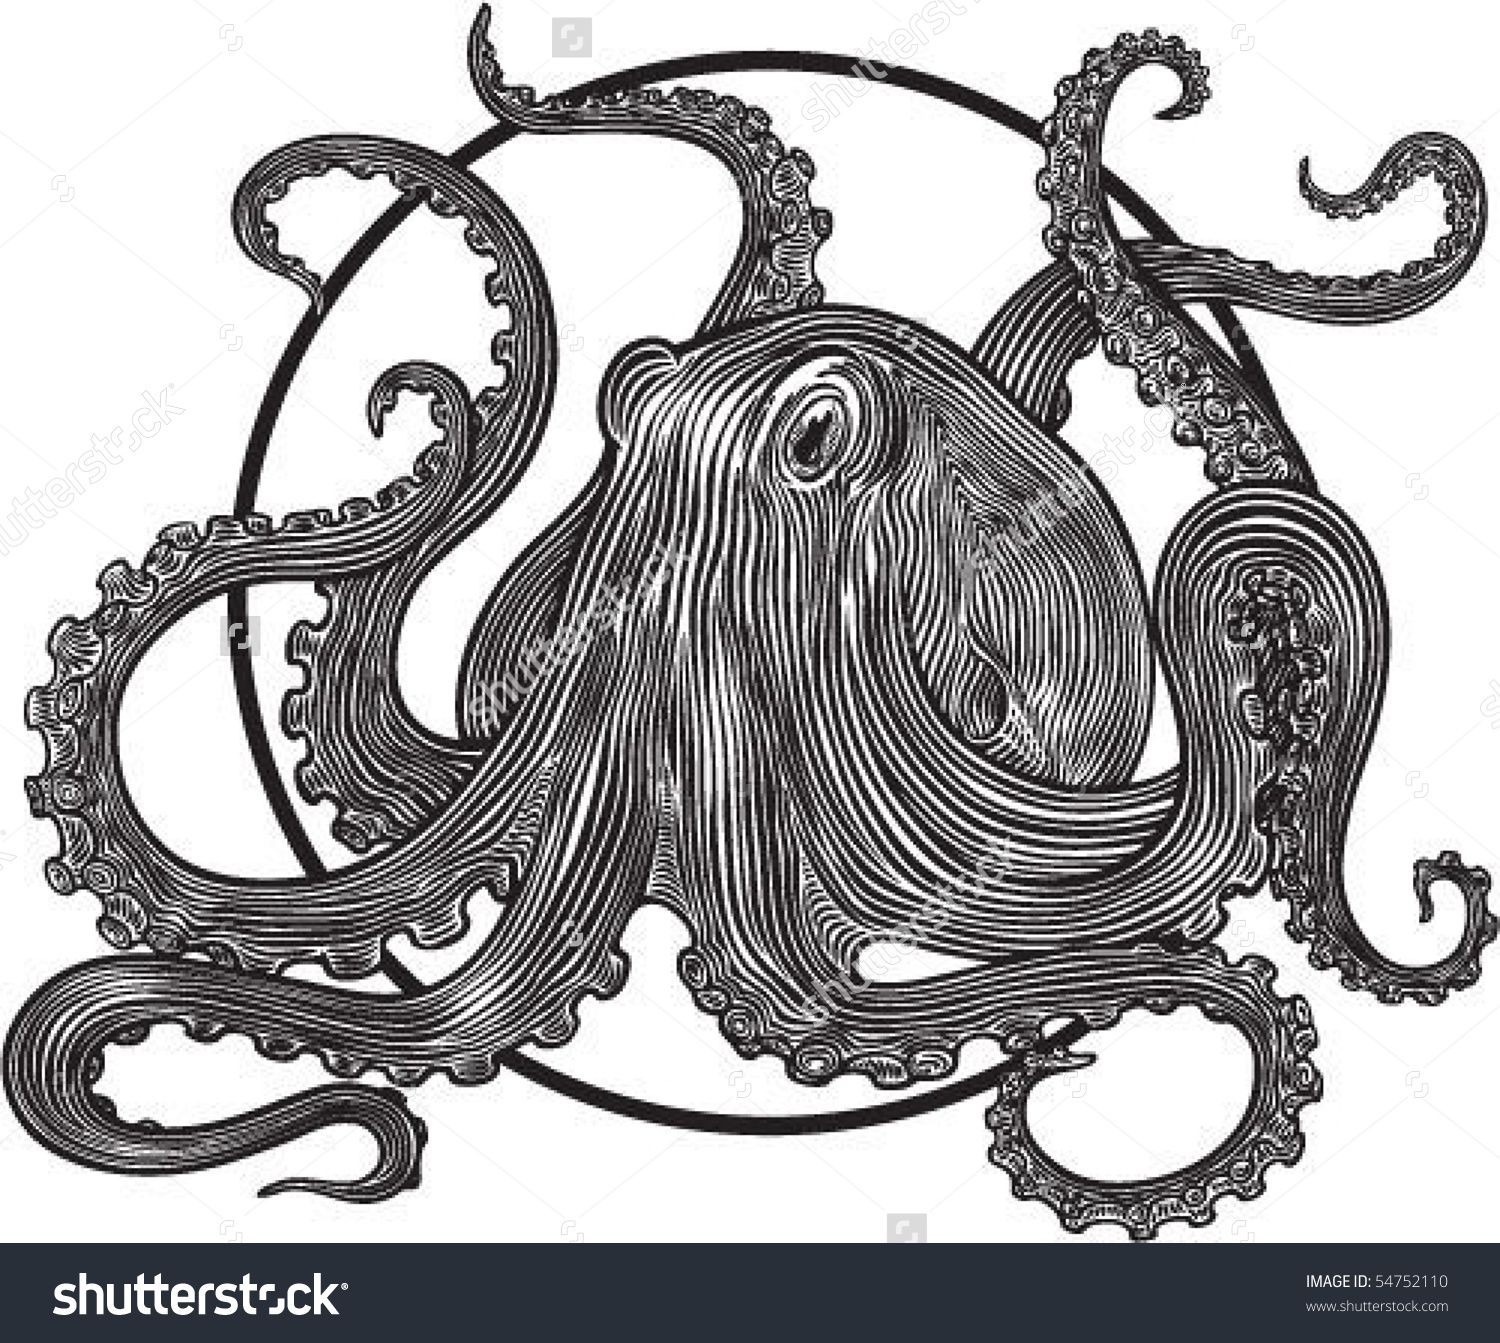 Octopus Papercraft Stock Vector Vector Illustration with Octopus Engraving Style